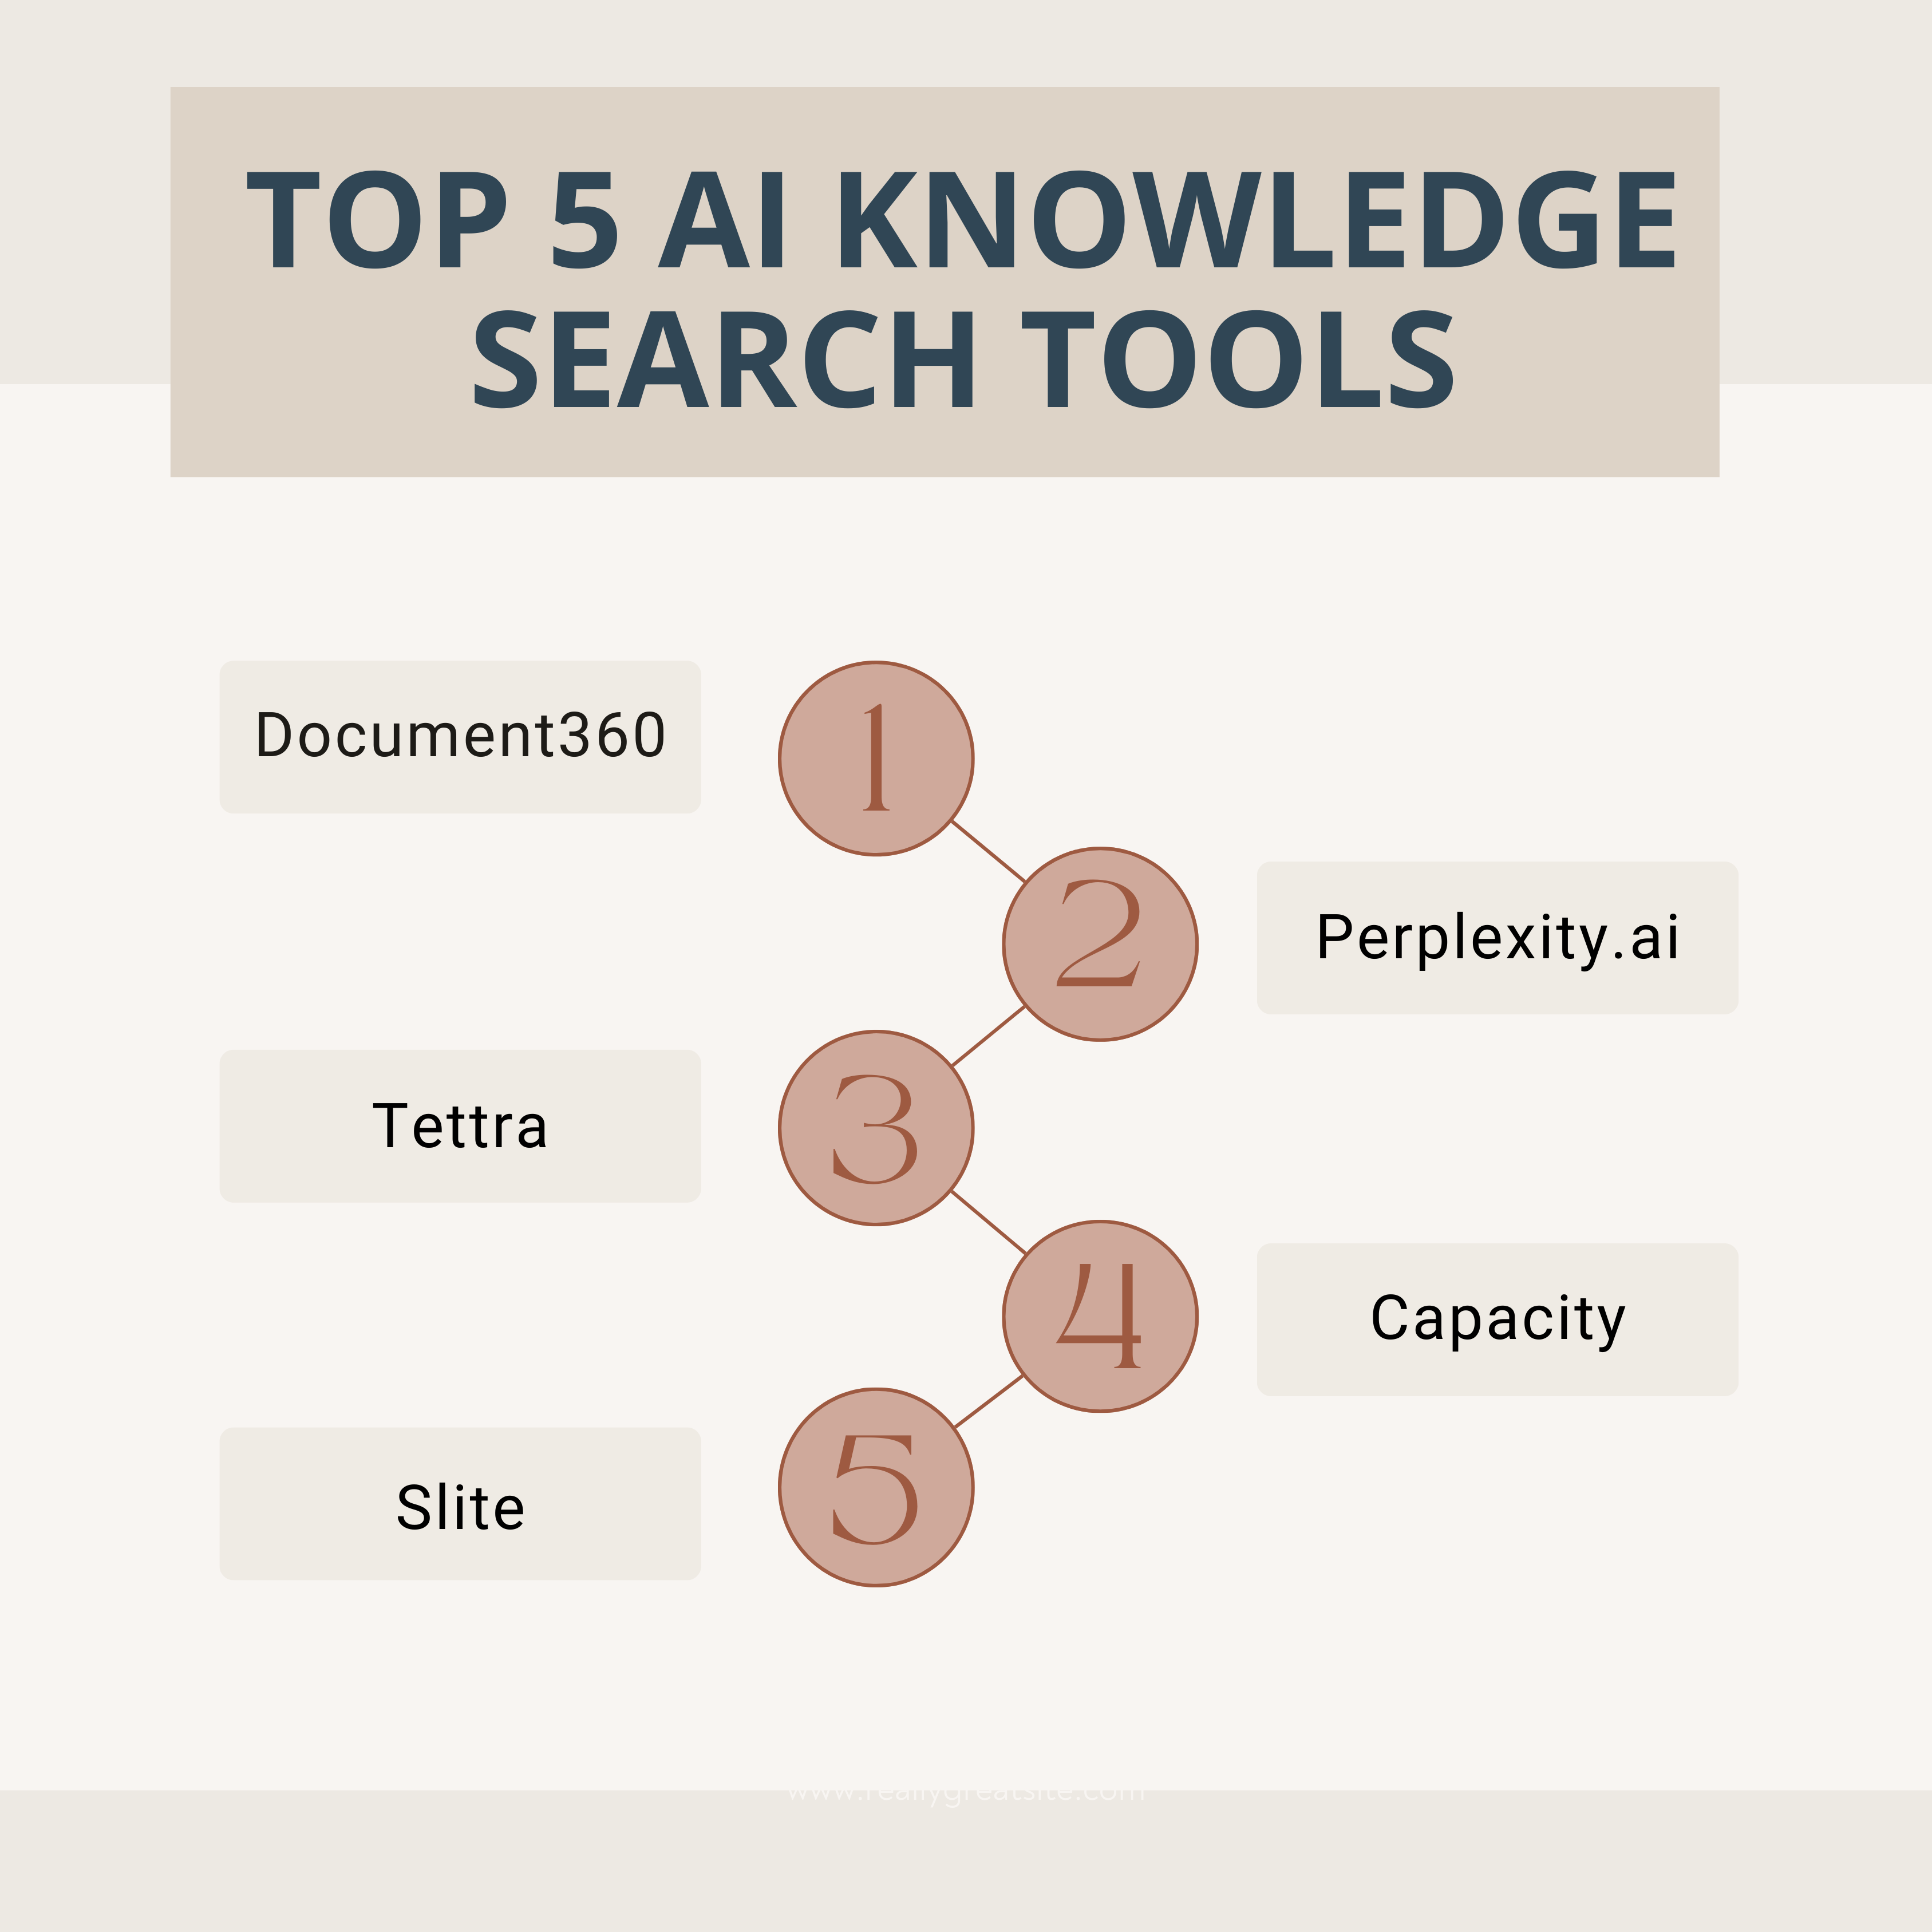 Top 5 AI Knowledge Search Tools